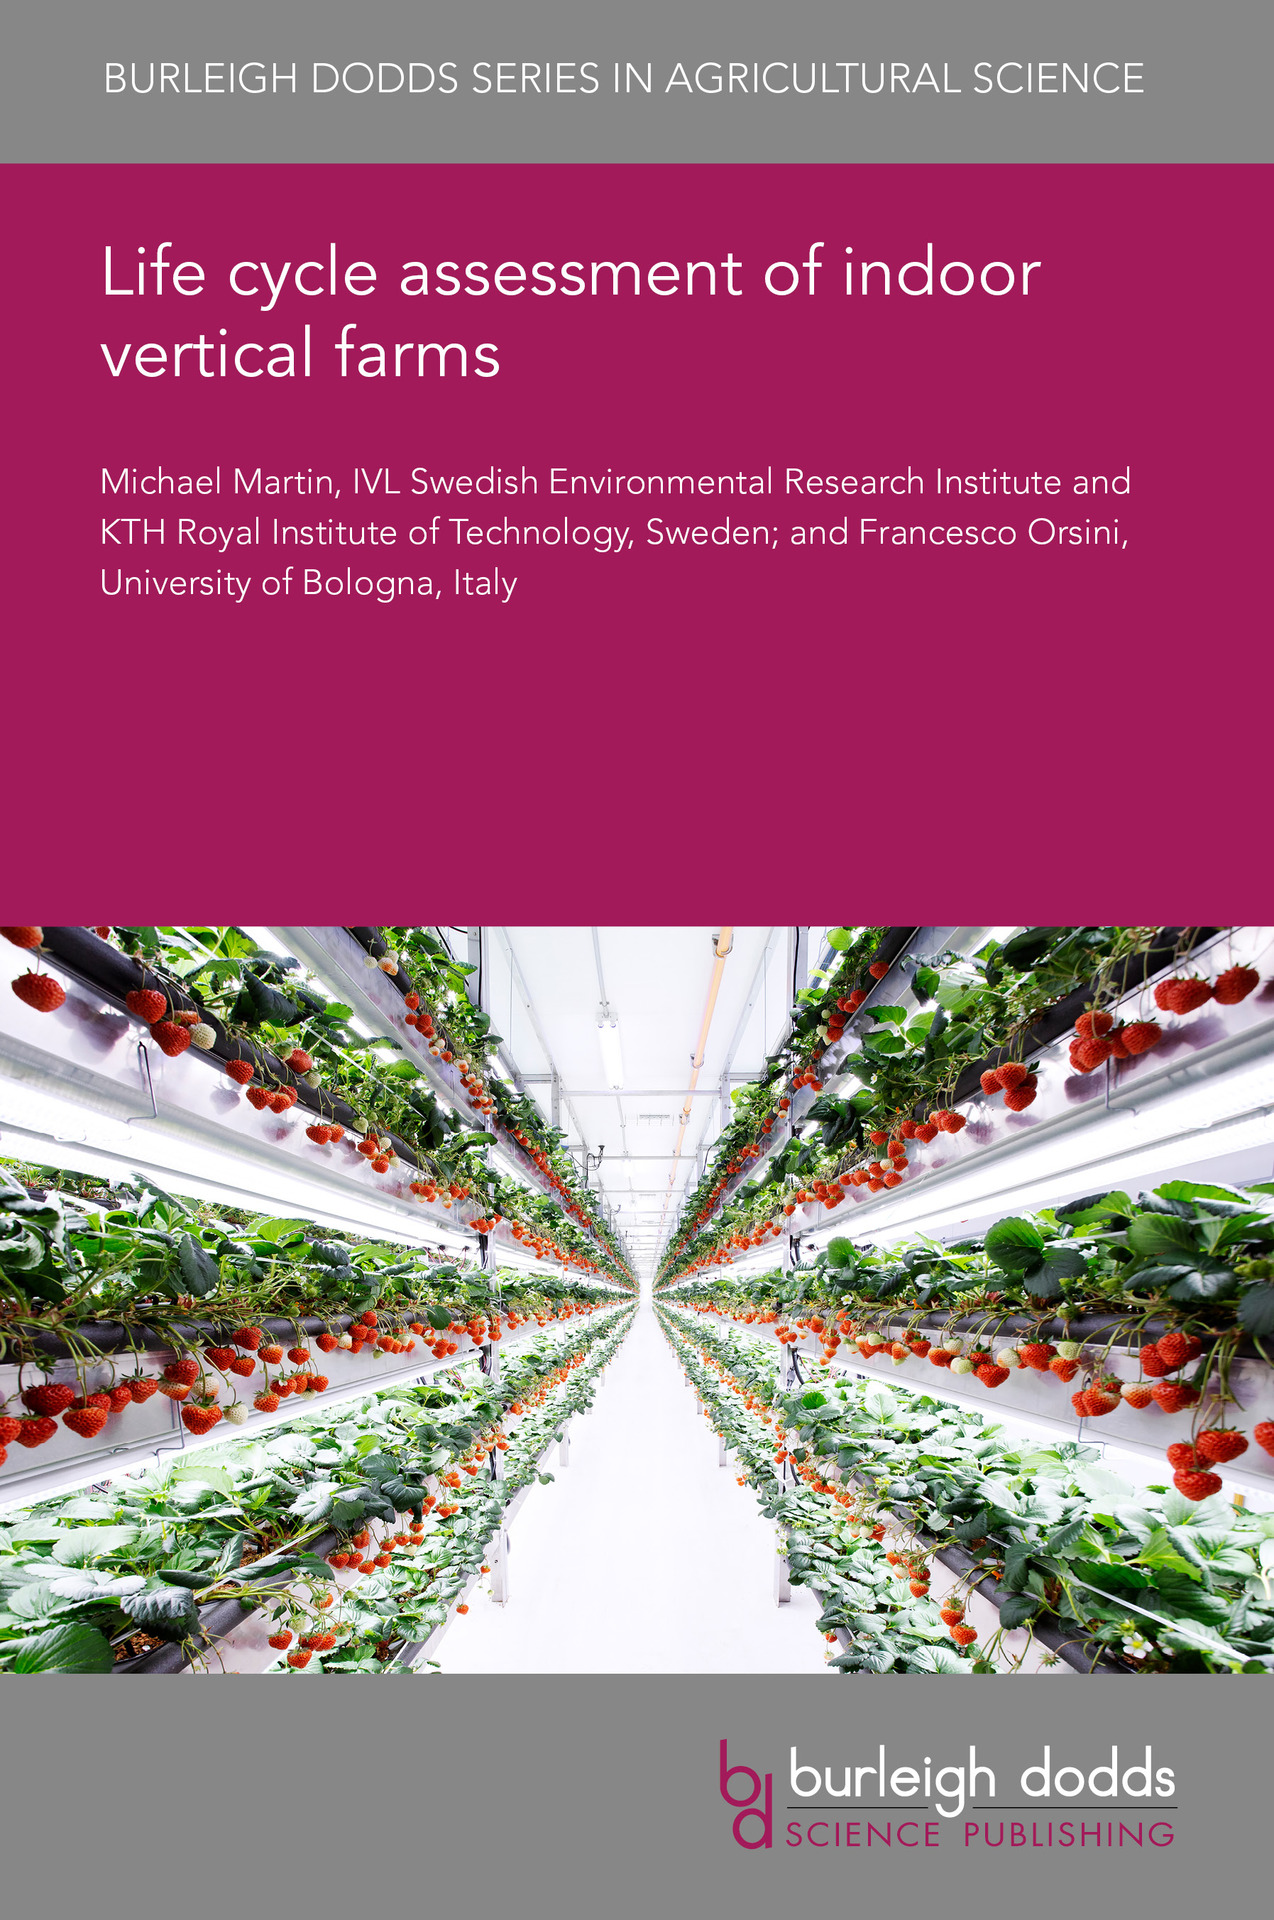 Life cycle assessment of indoor vertical farms